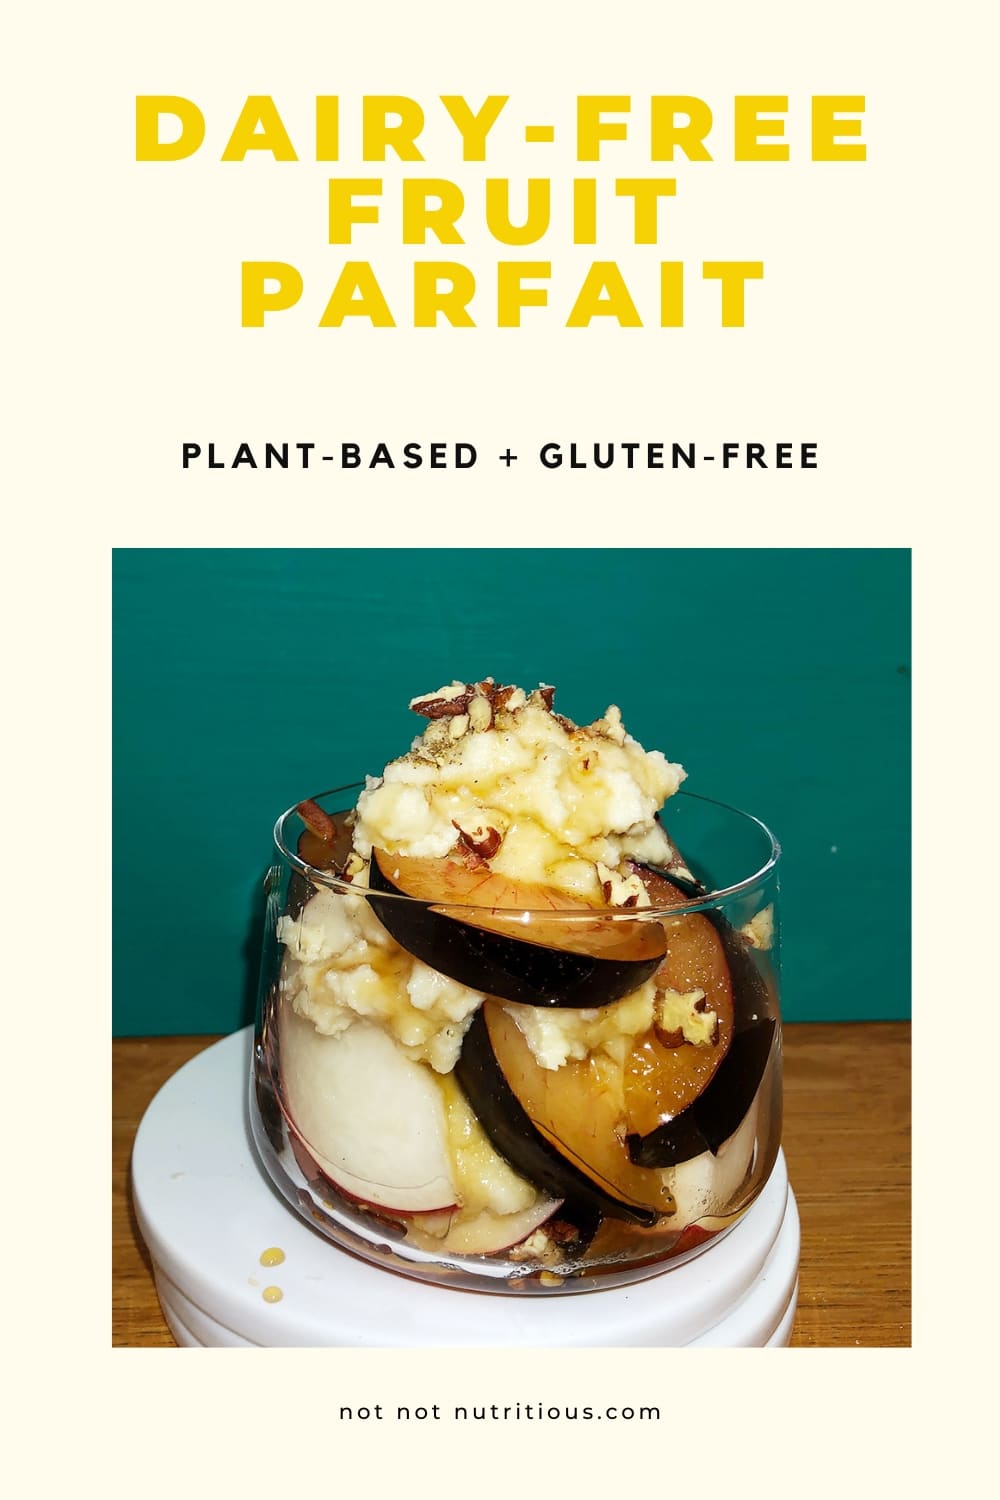 Pin for Dairy-Free Fruit Parfait. Plant-based and gluten-free